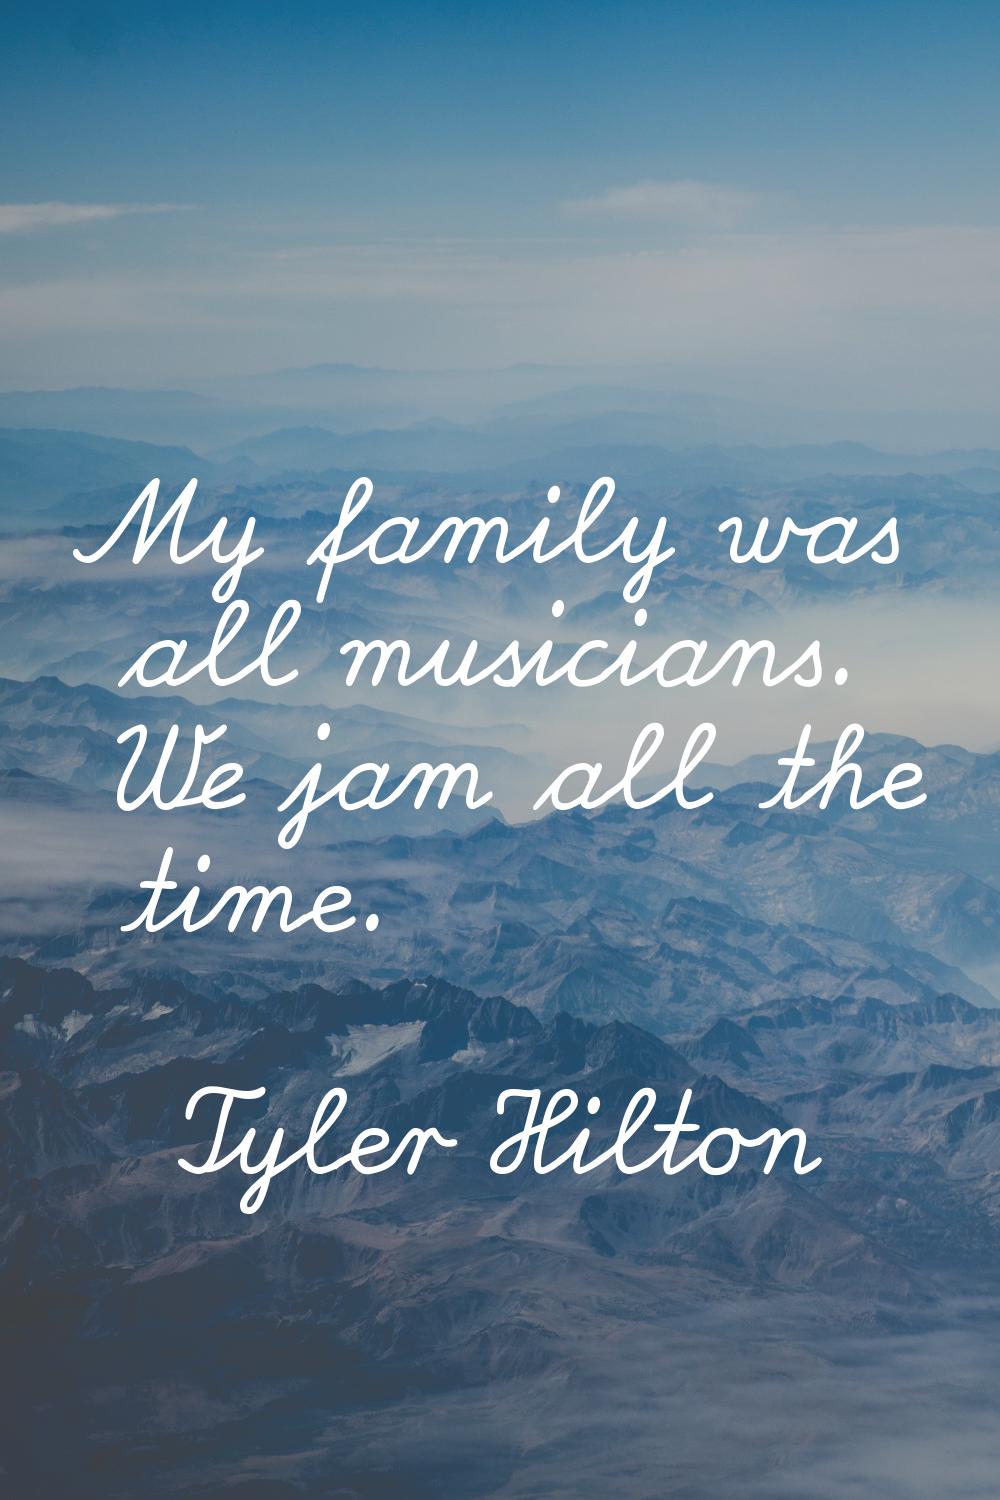 My family was all musicians. We jam all the time.